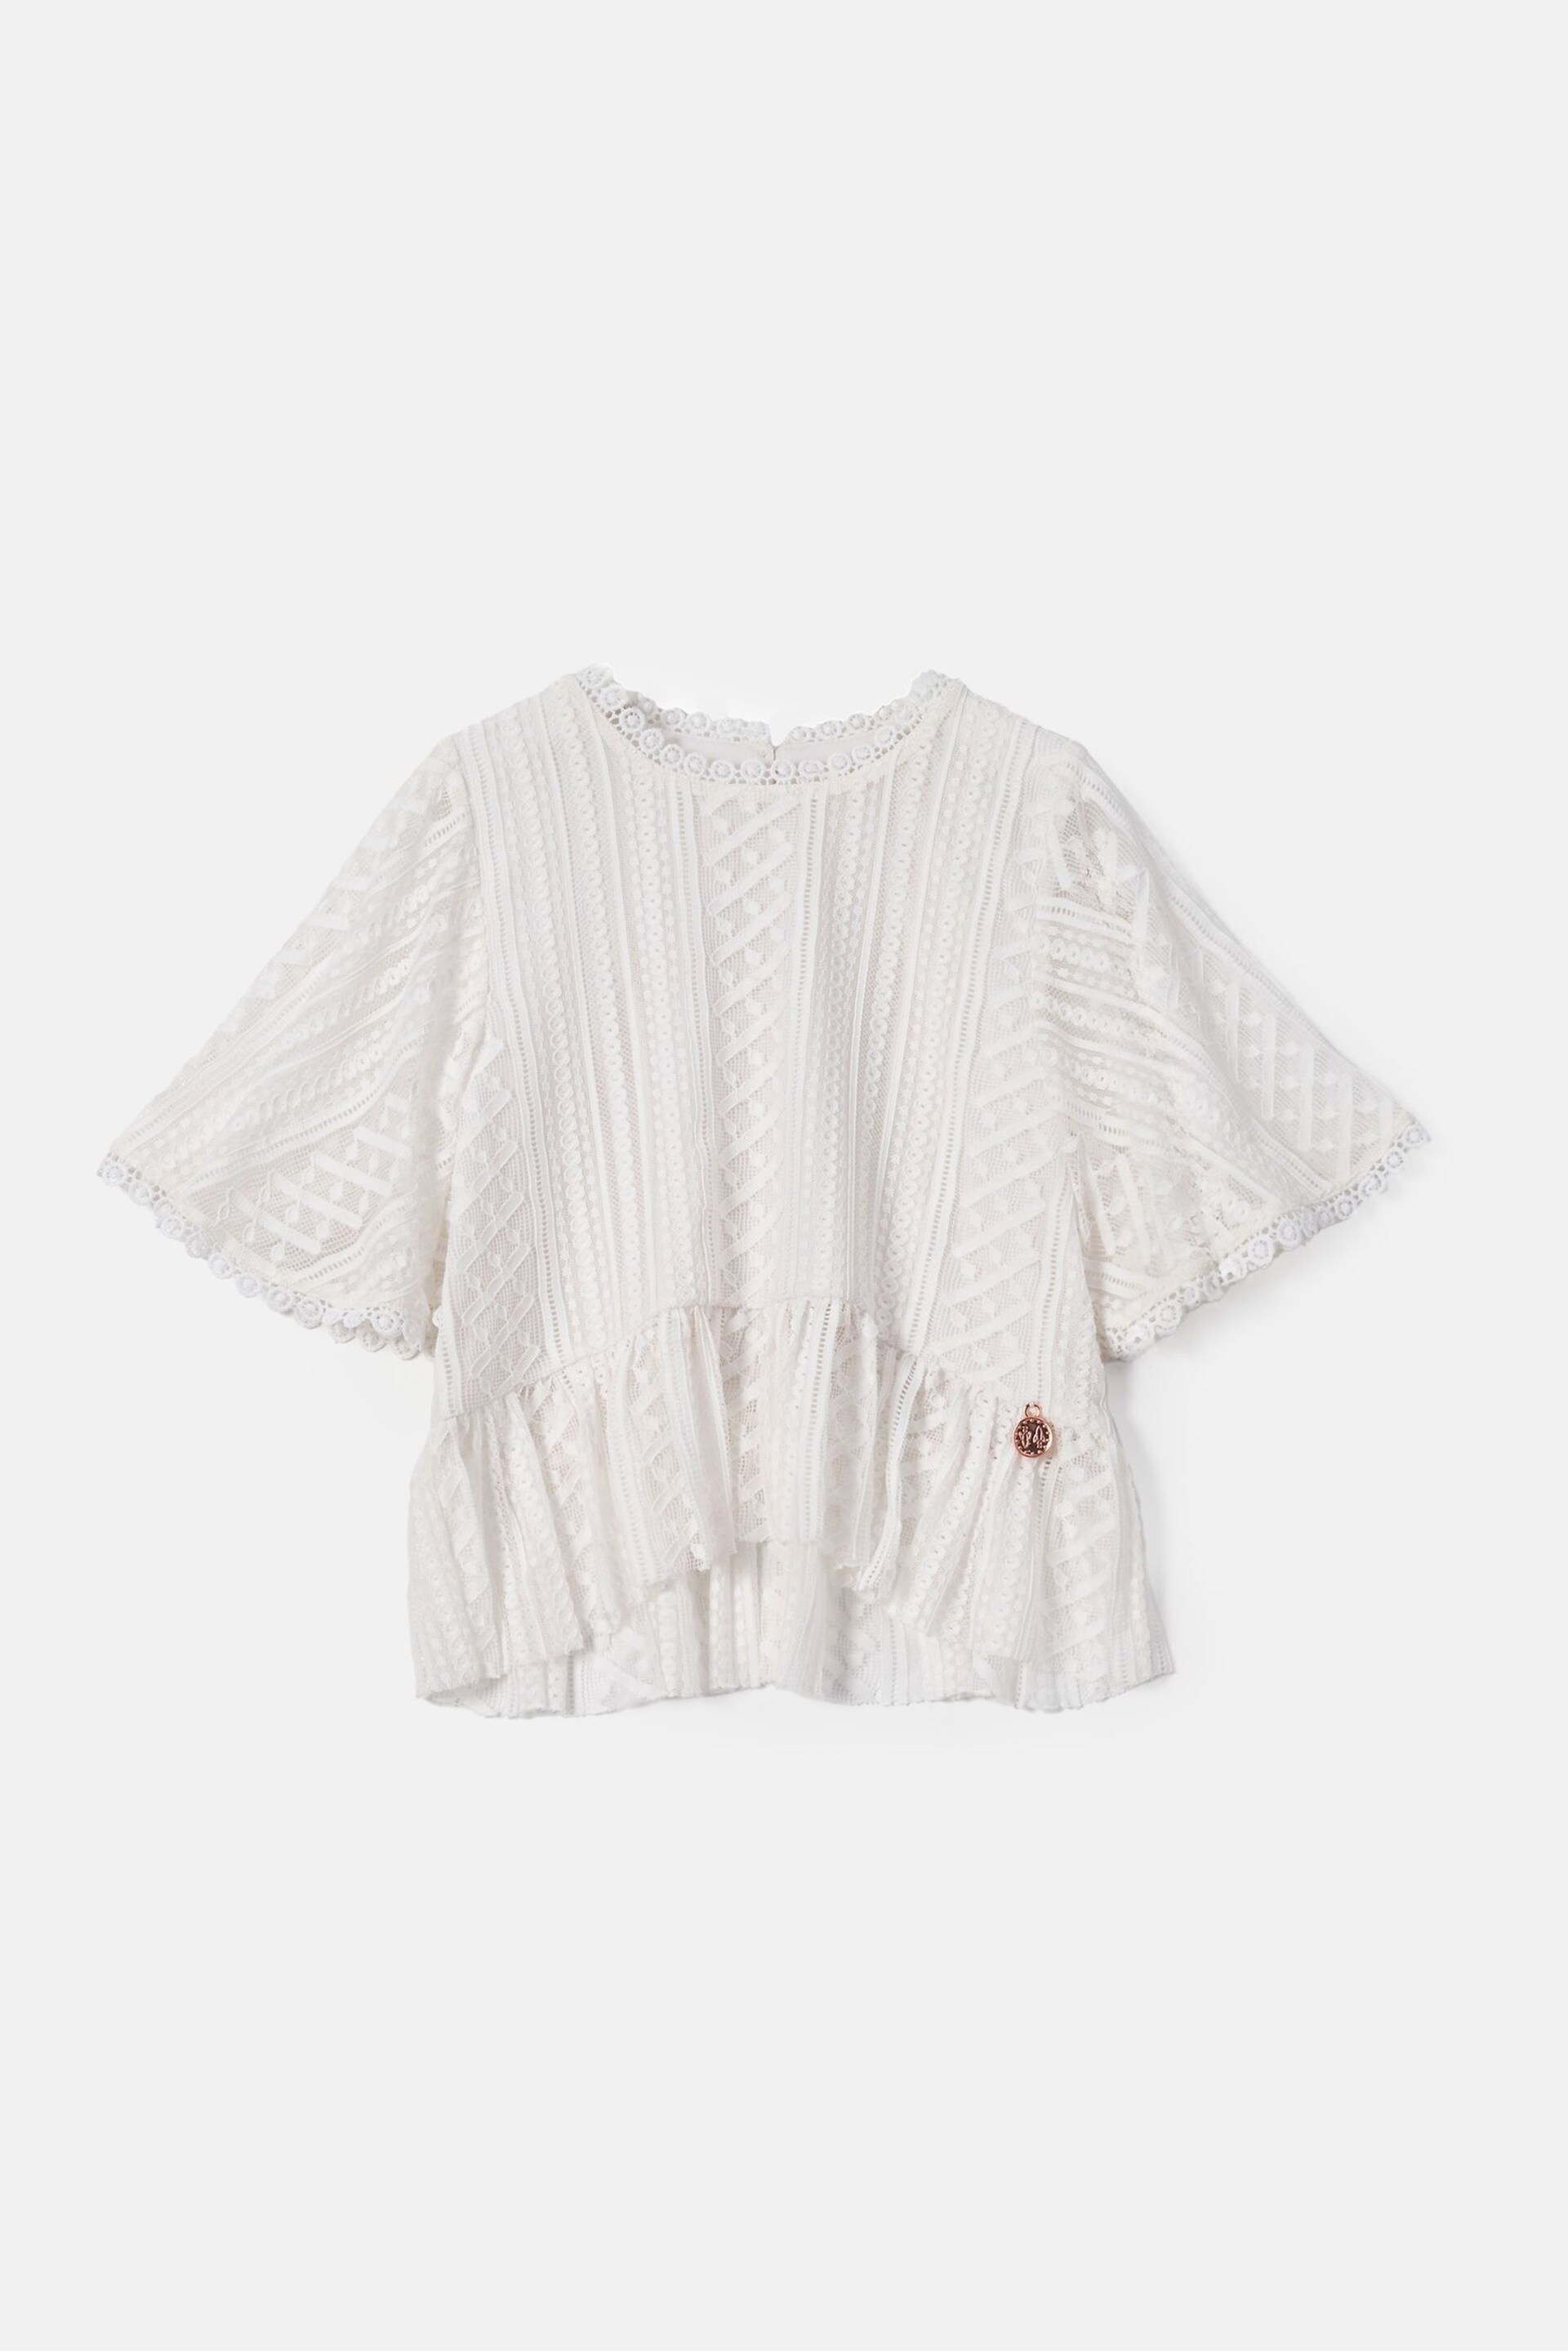 Angel & Rocket Cream Anabelle Cape Lace Top - Image 1 of 1